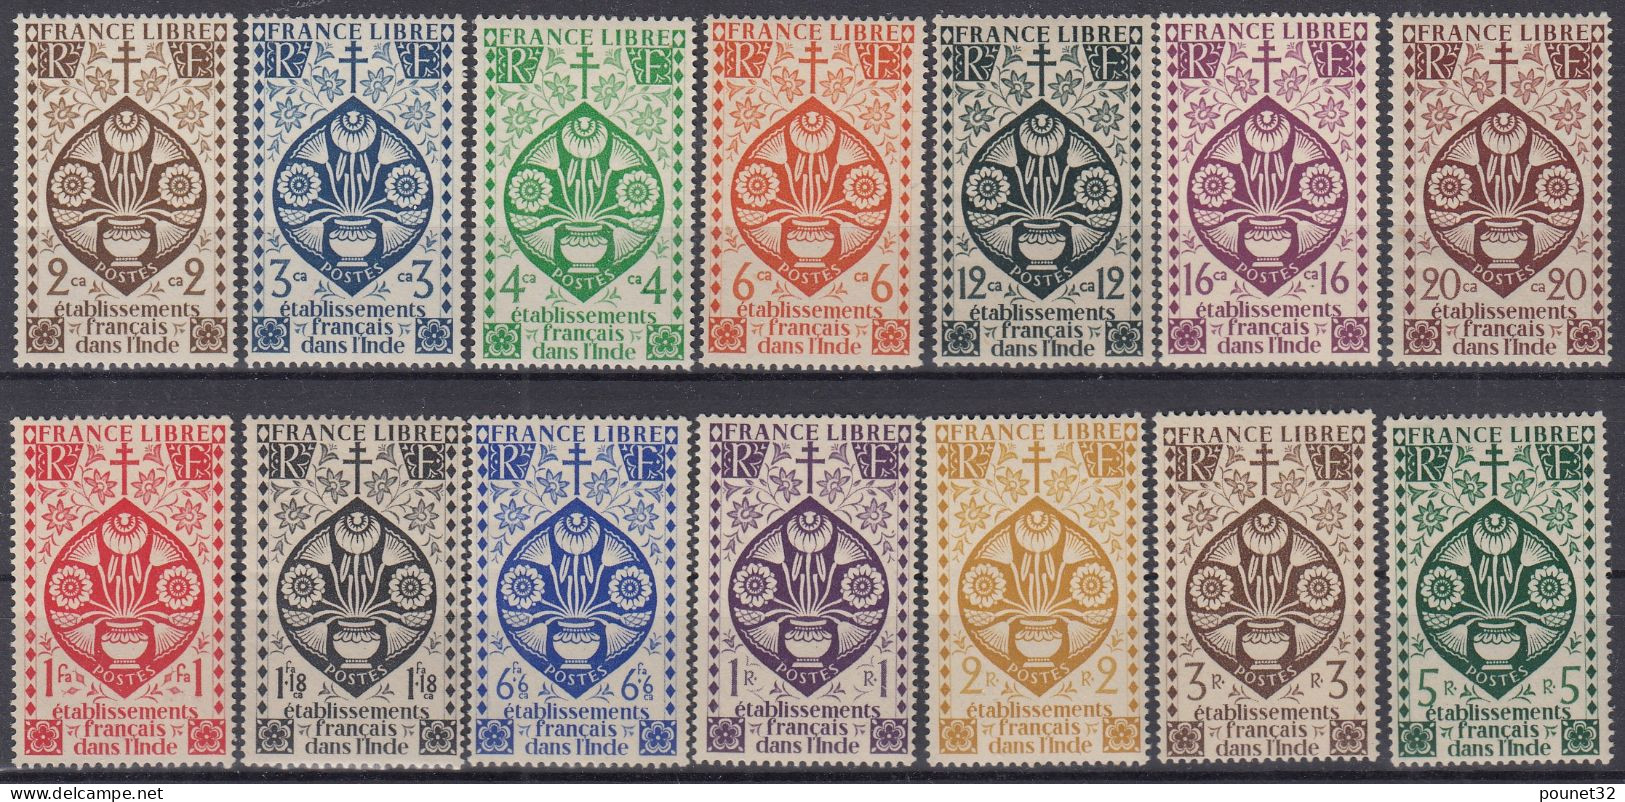 TIMBRE INDE SERIE COMPLETE N° 217/230 NEUFS * GOMME LEGERE TRACE DE CHARNIERE - Unused Stamps